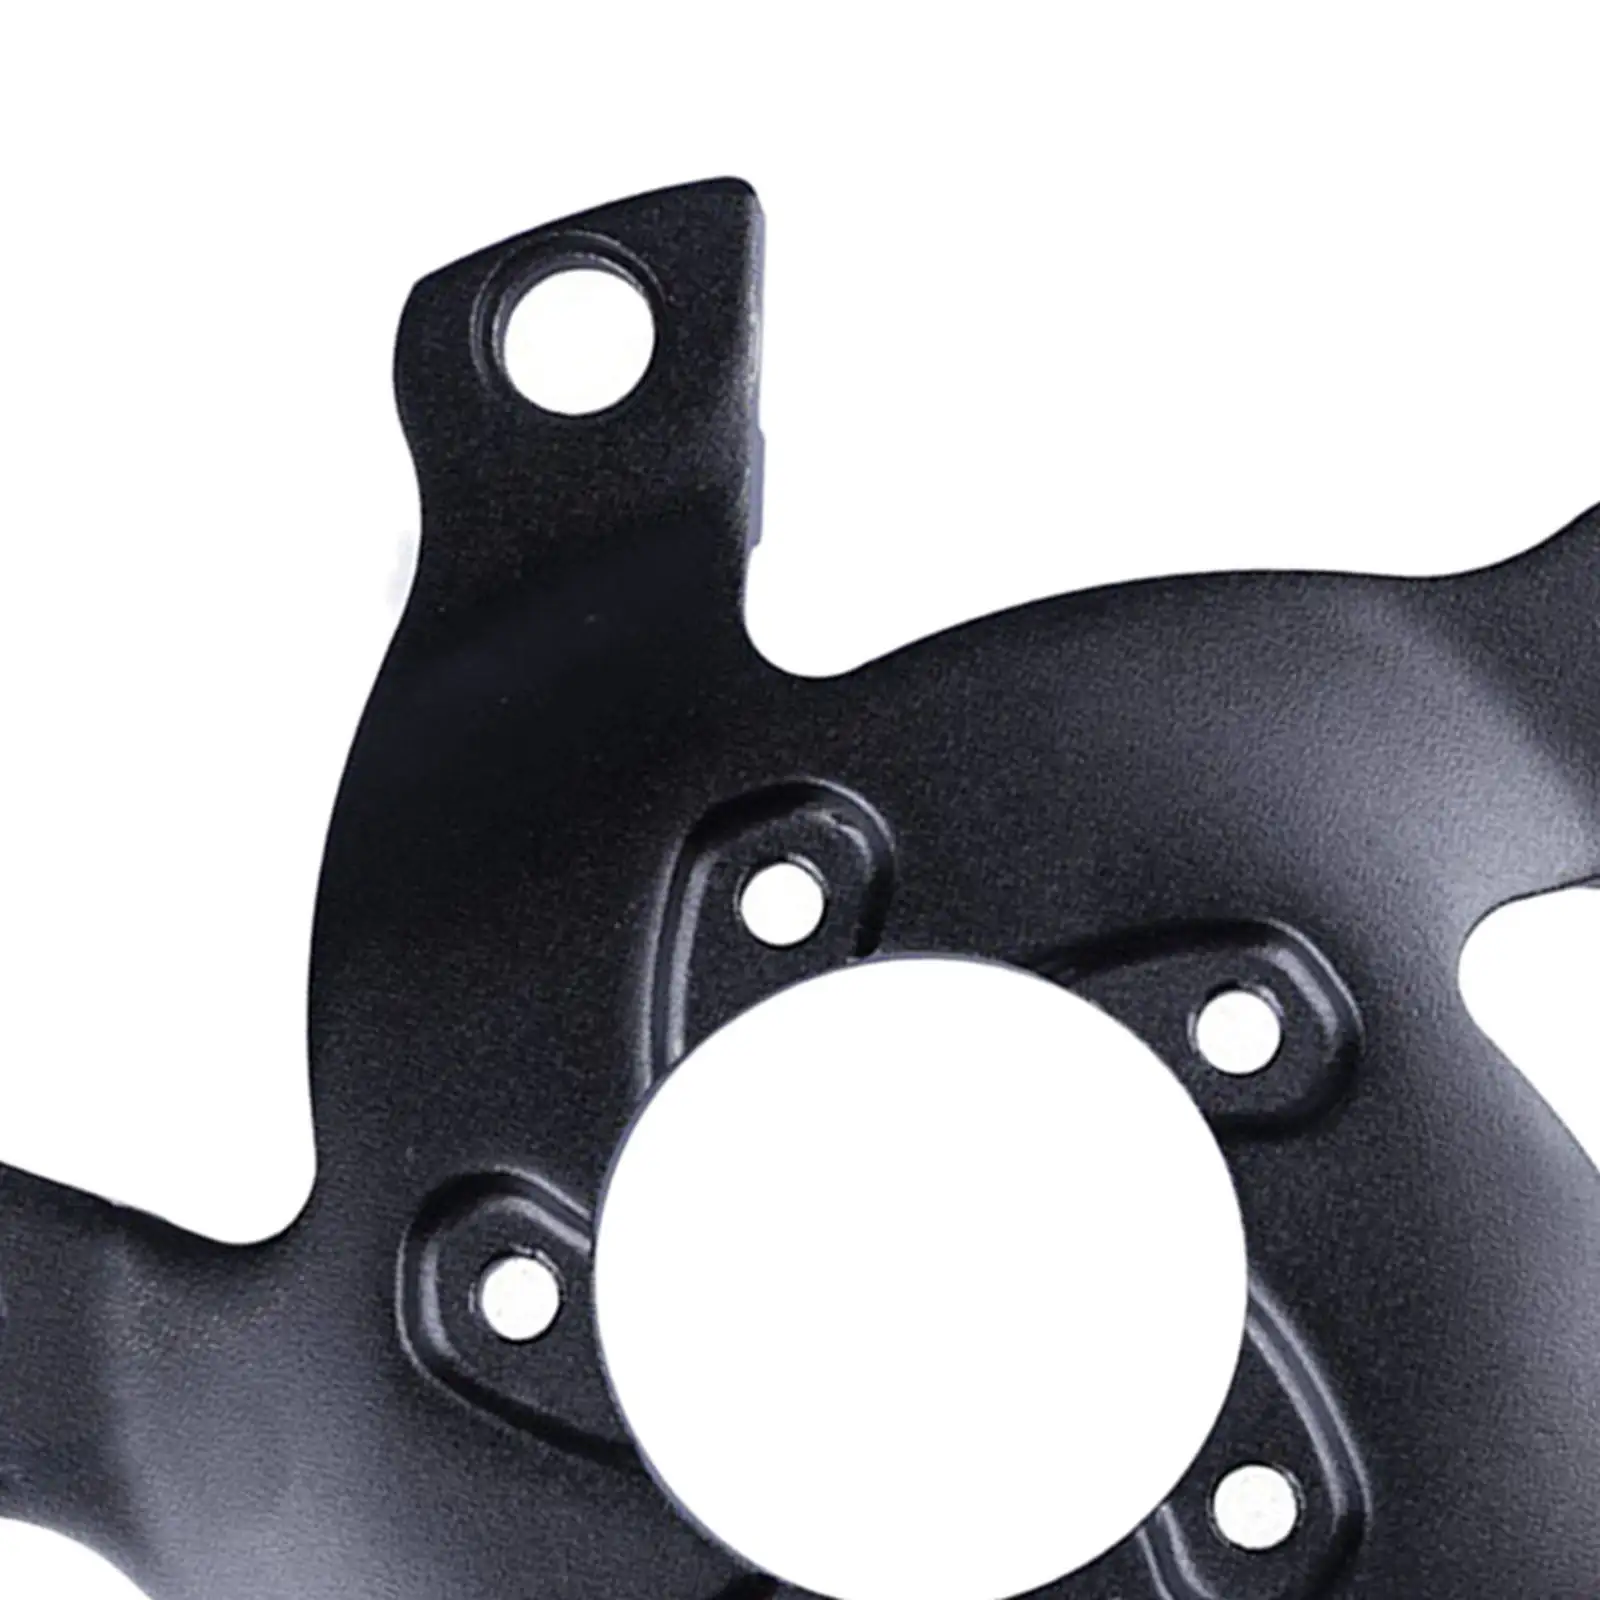 130BCD Aluminum Alloy Ultra-light E-Bike Chainring Spider Adapter DIY Chain Ring Components Part Fit for Bafang Mid Drive Motor